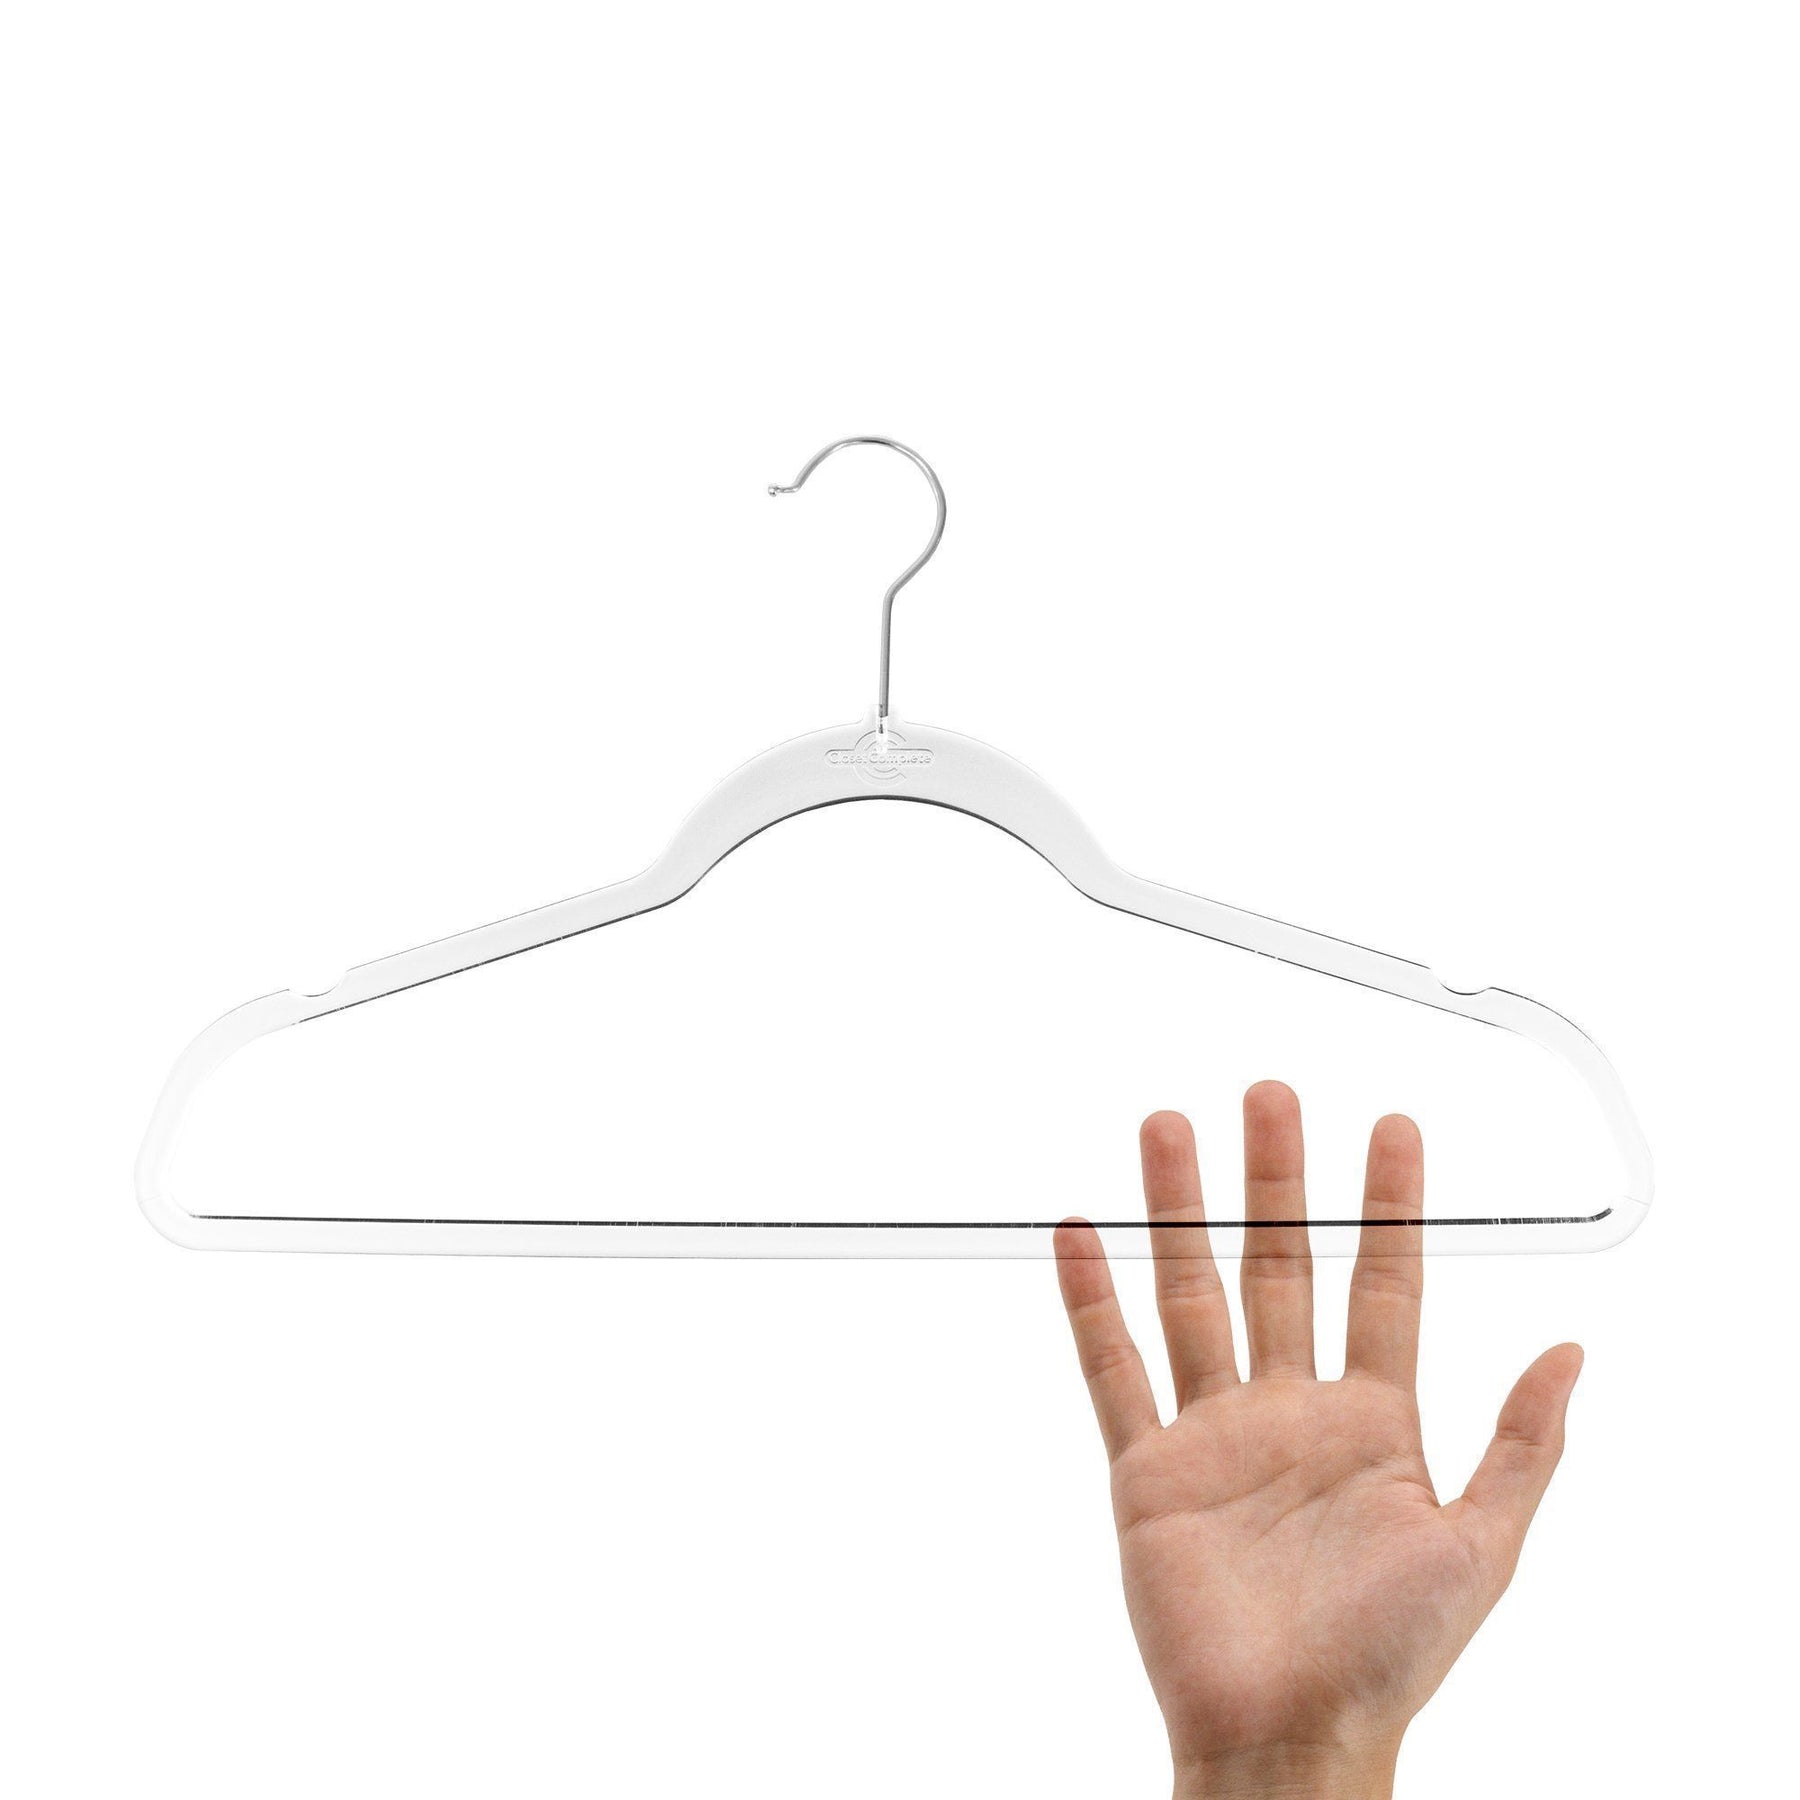 https://cdn.shopify.com/s/files/1/2993/5404/products/closet-complete-acrylic-hangers-completely-clear-invisible-acrylic-hangers-69185-7162341556309_1800x1800.jpg?v=1552518837